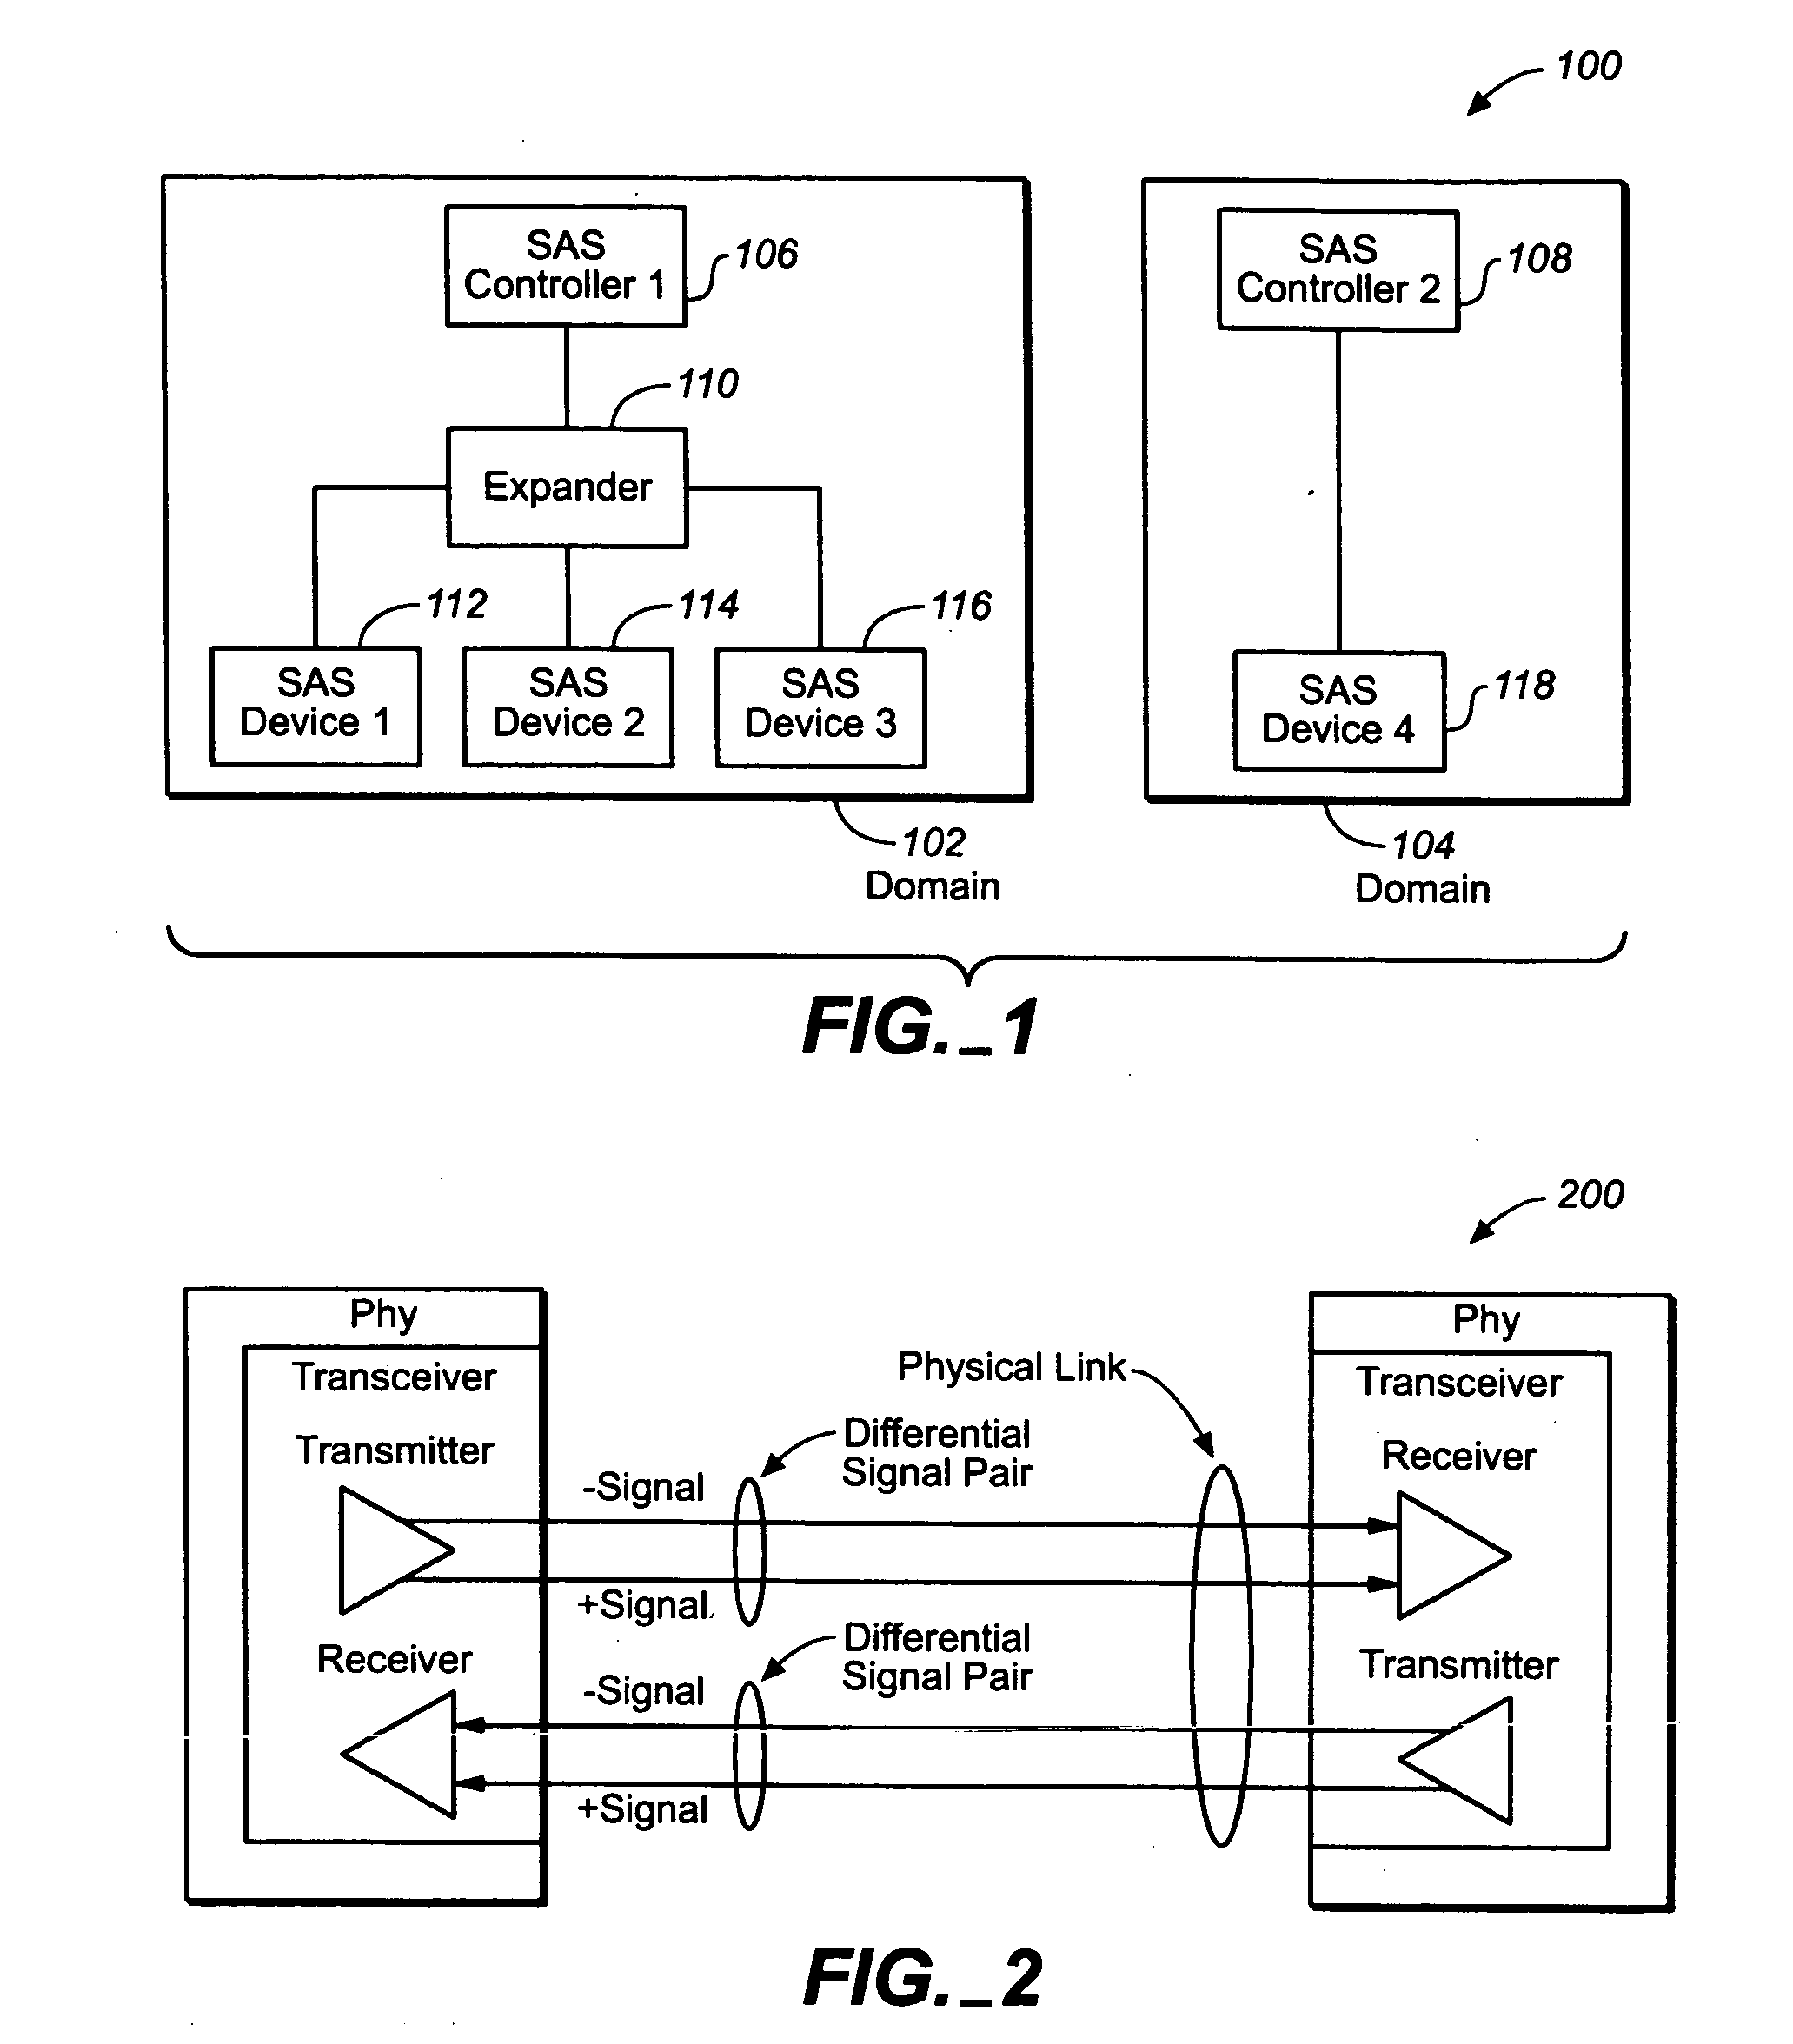 System and method for SAS PHY dynamic configuration